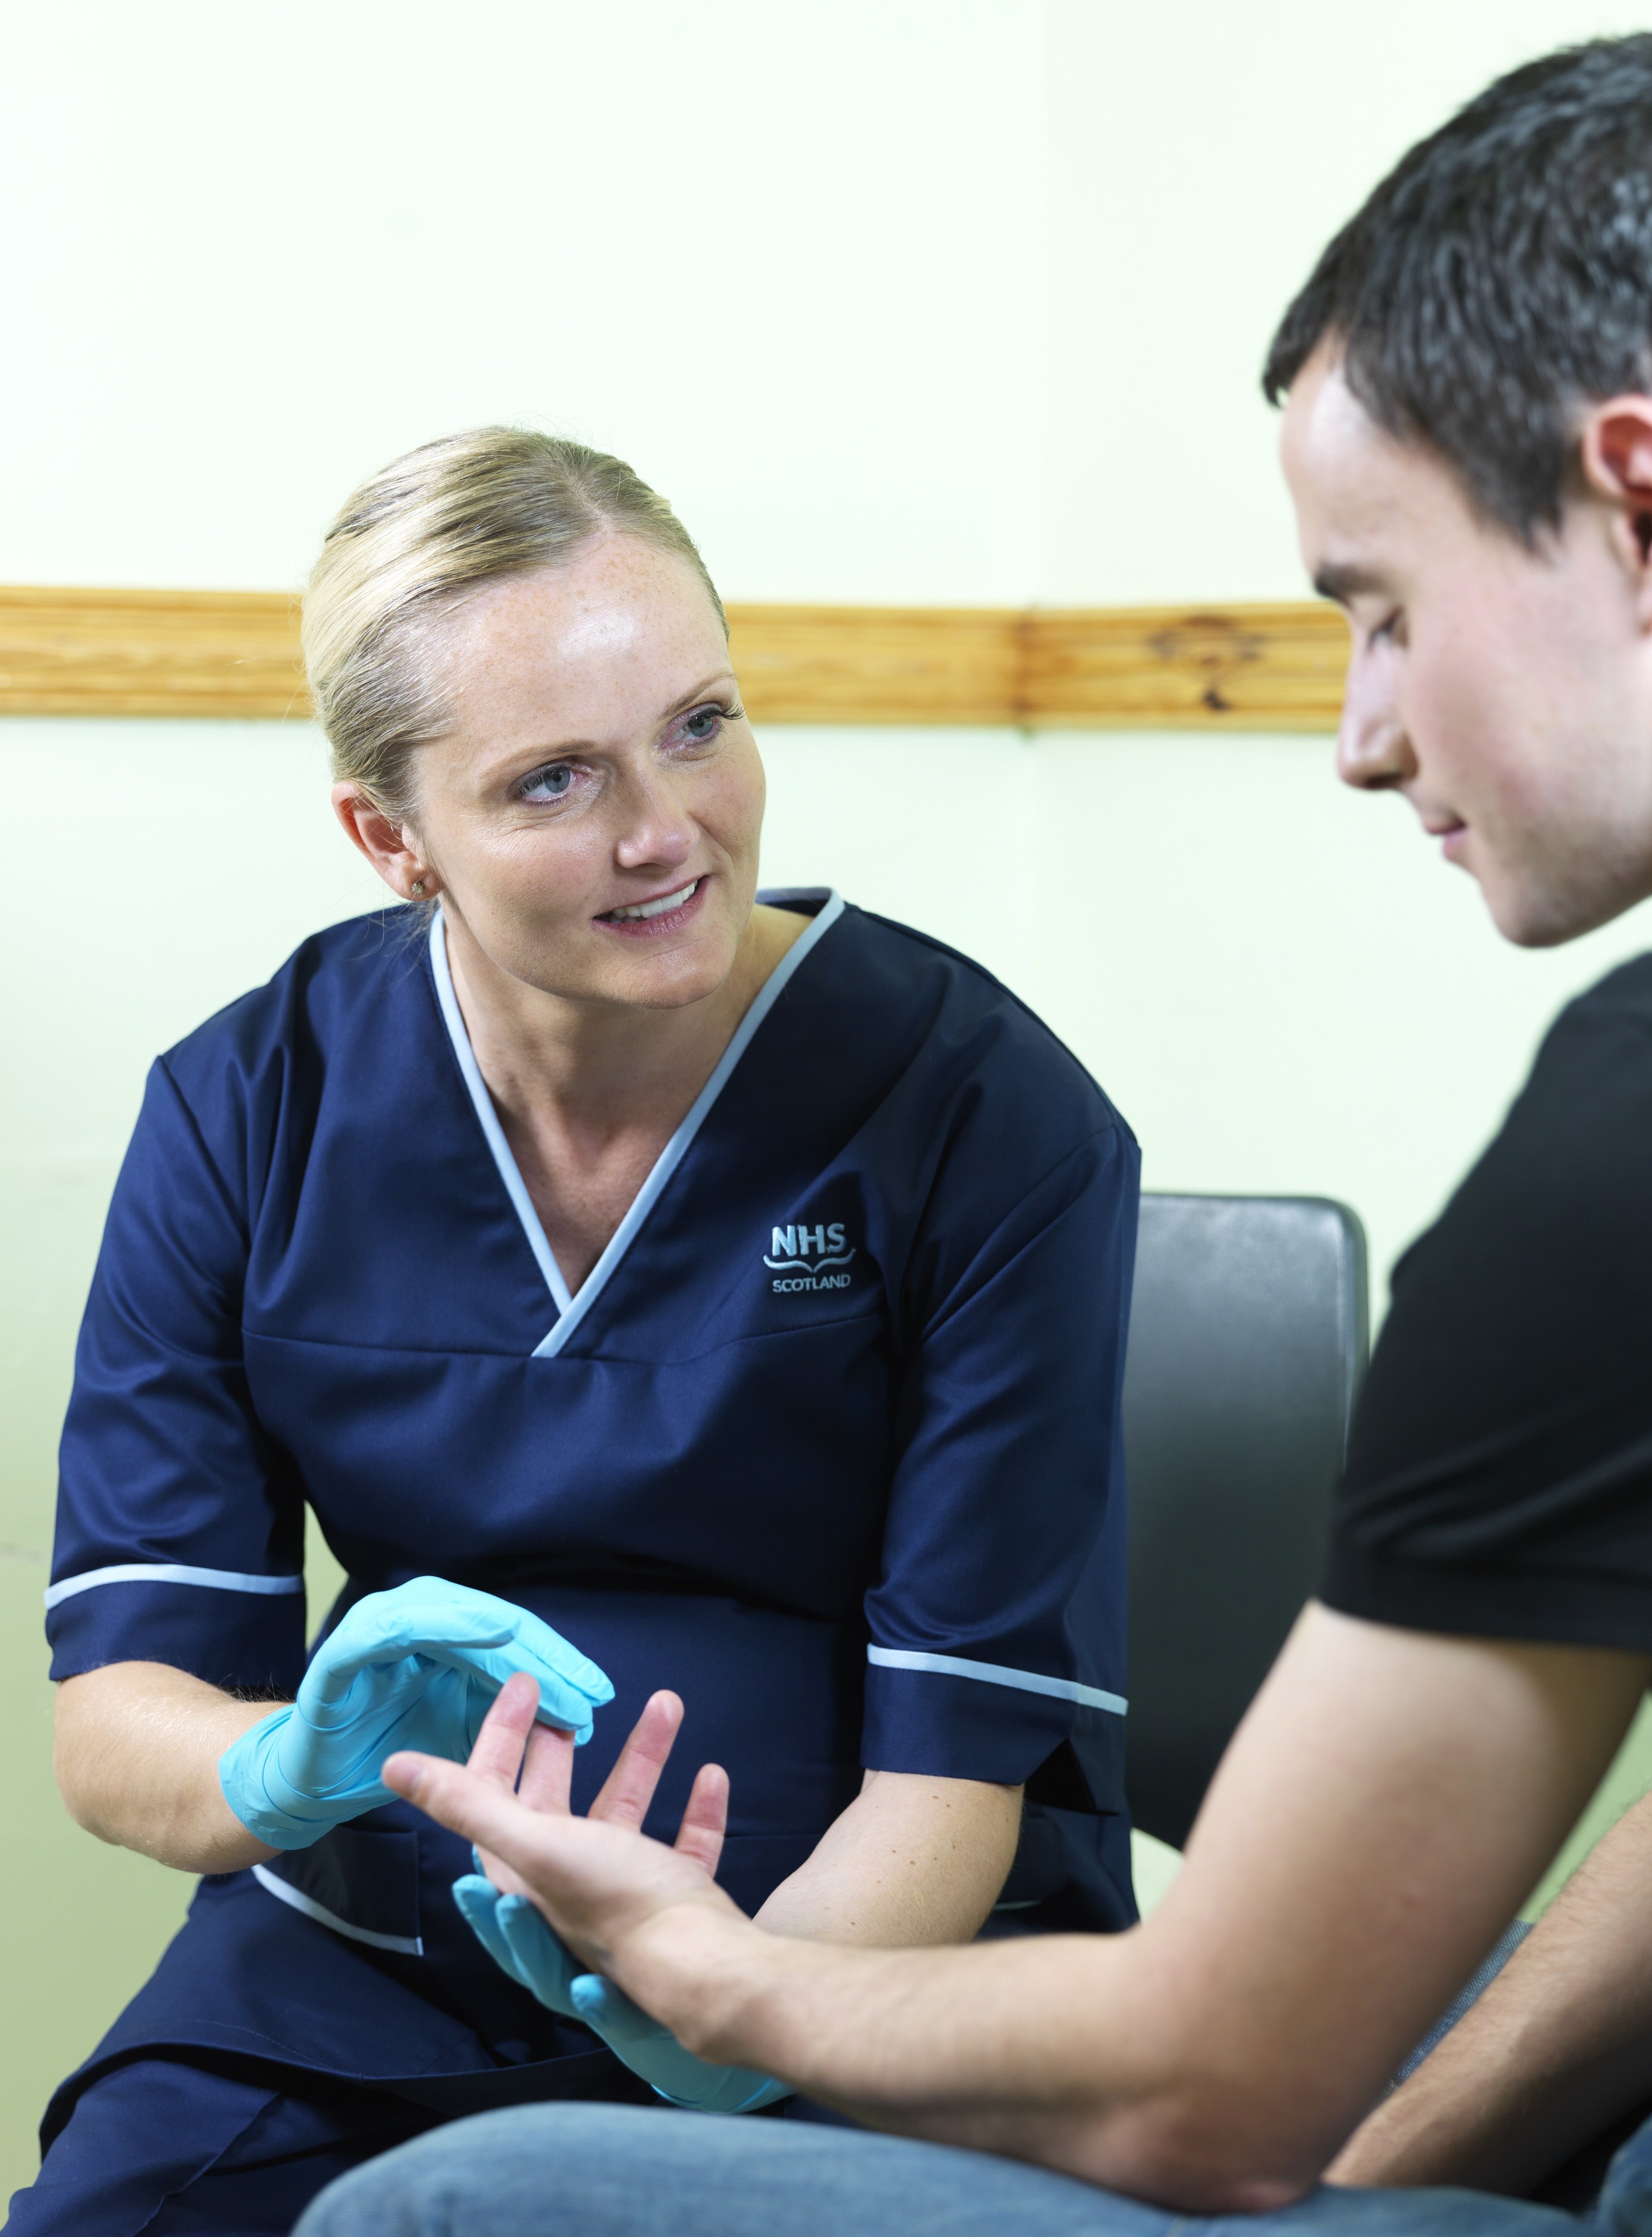 An NHS Scotland staff member treating a patient.